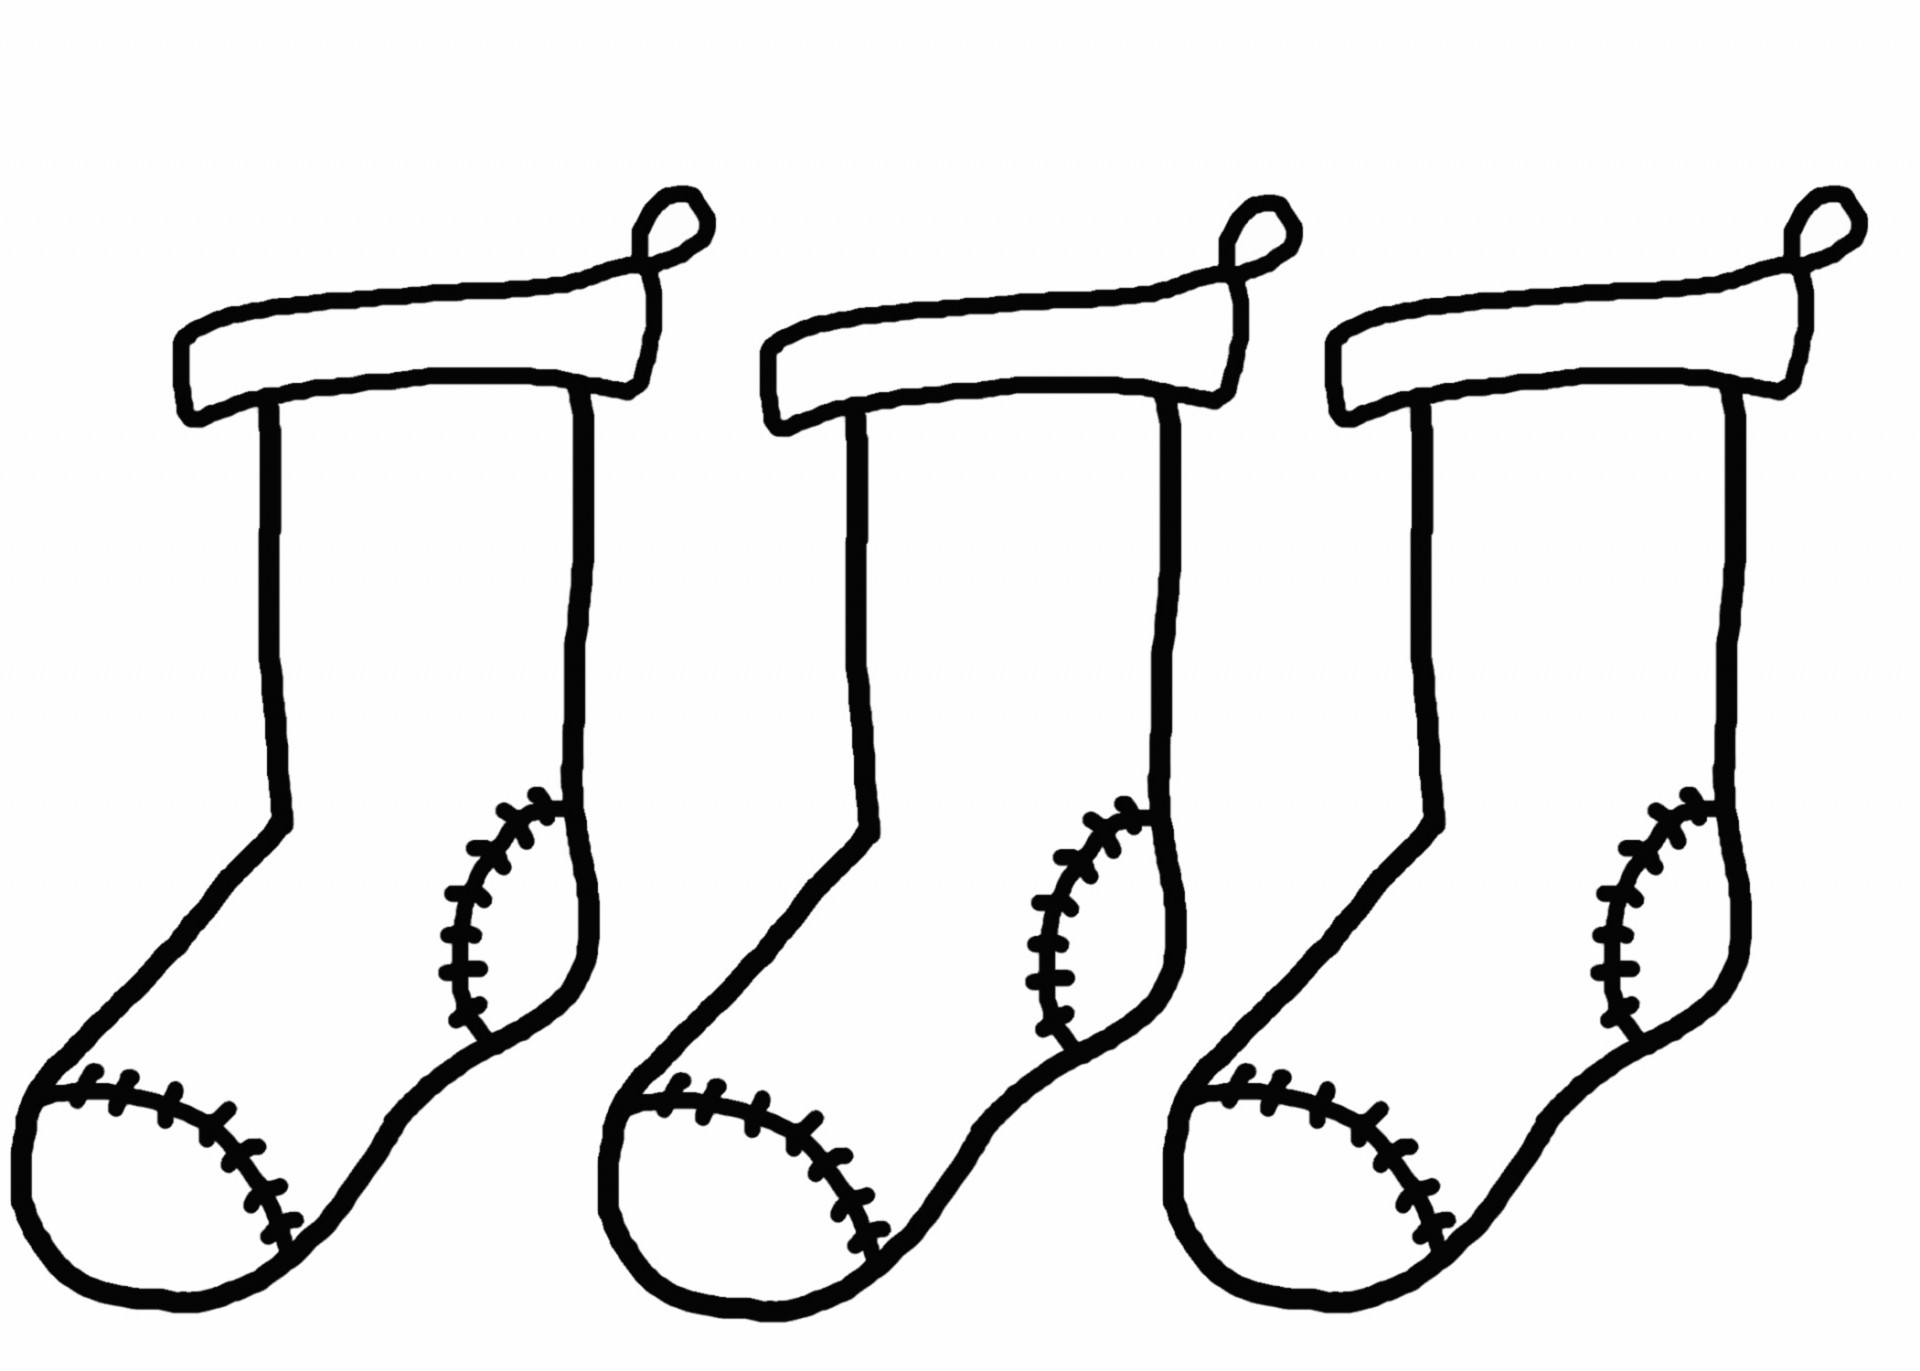 stocking-outlines-free-stock-photo-public-domain-pictures